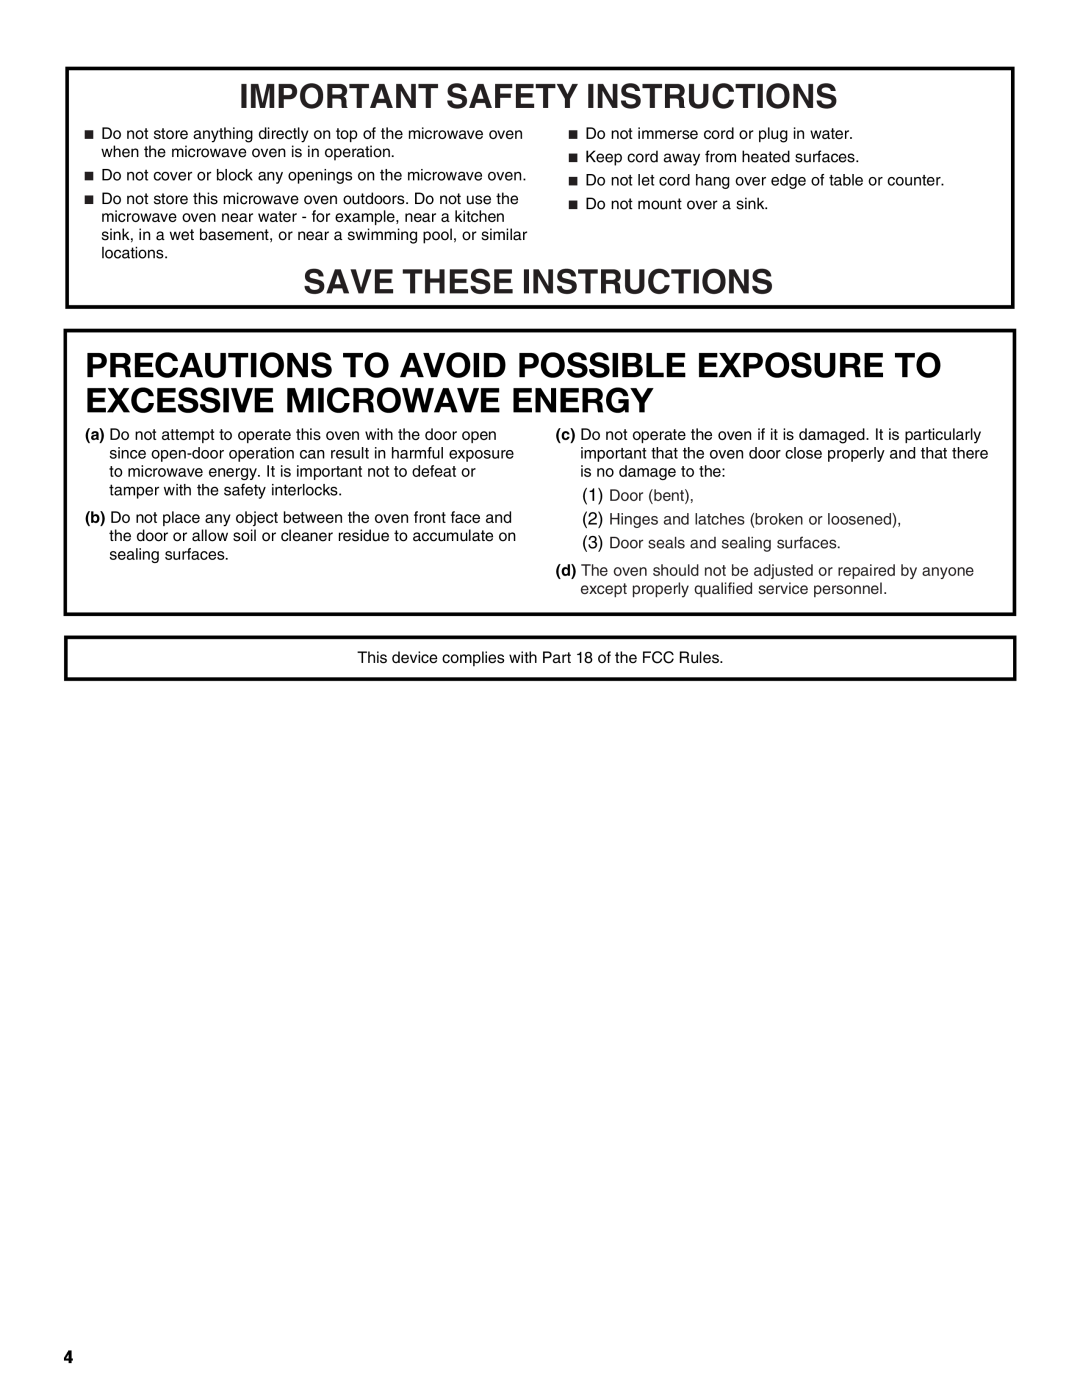 Jenn-Air JMC1116 manual Precautions To Avoid Possible Exposure To Excessive Microwave Energy, Important Safety Instructions 